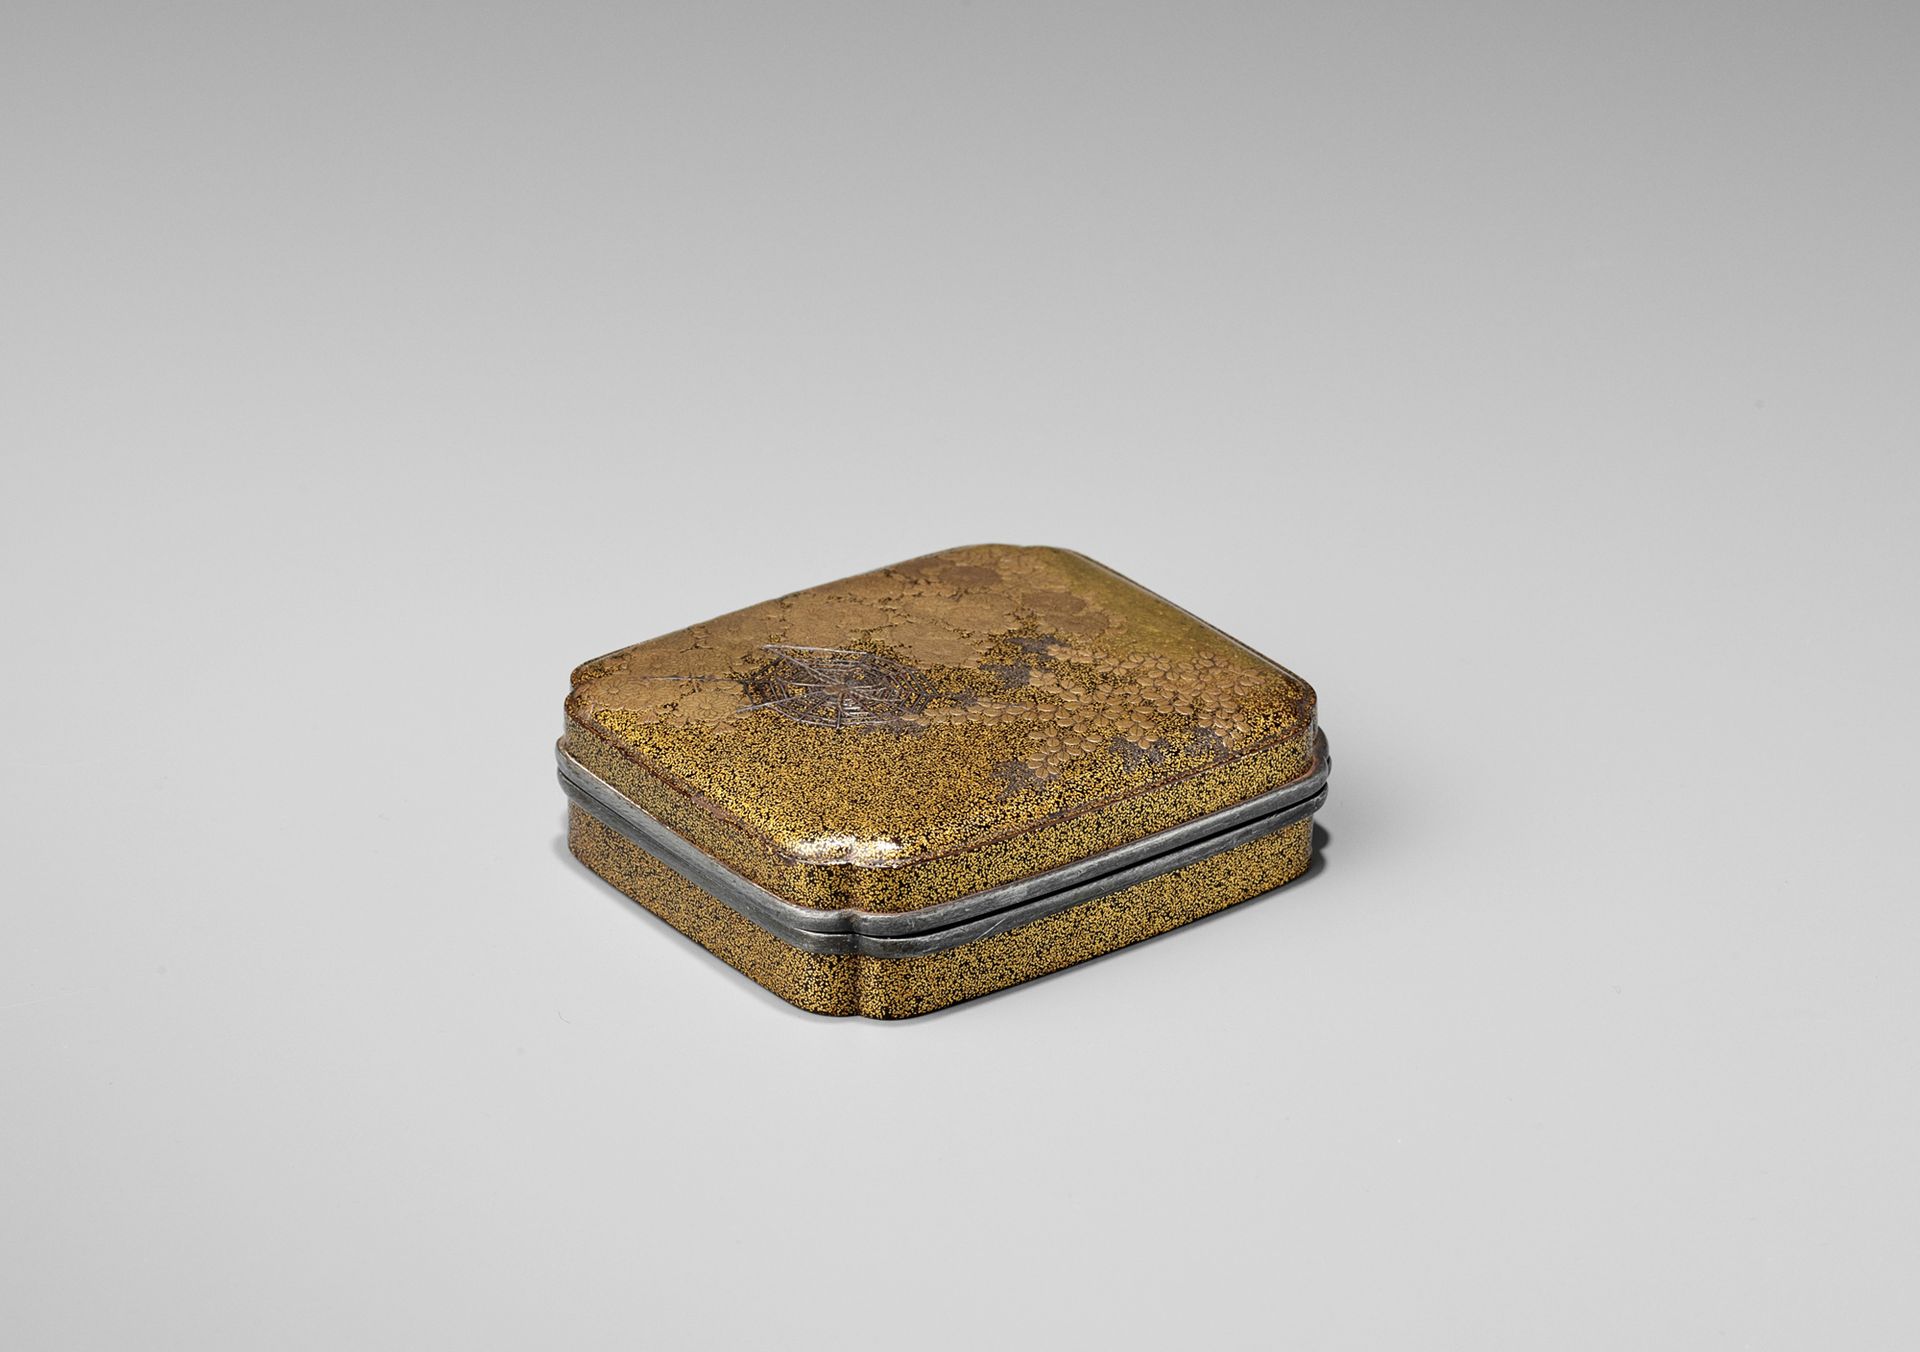 A FINE AND EARLY LACQUER KOGO (INCENSE BOX) AND COVER WITH KIKU FLOWERS AND SPID&hellip;